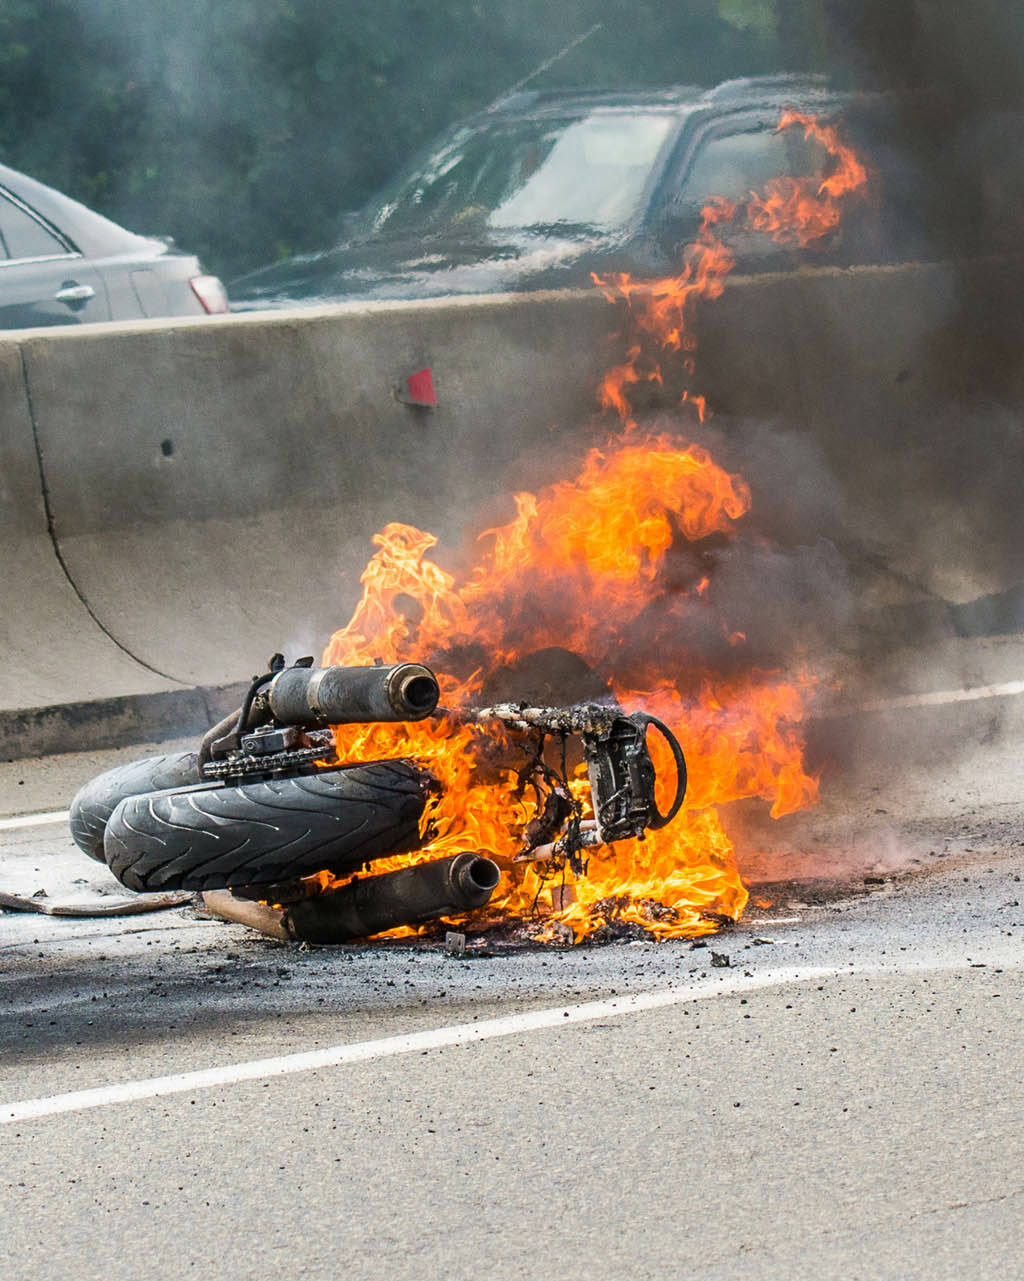 The motorcycle burns.